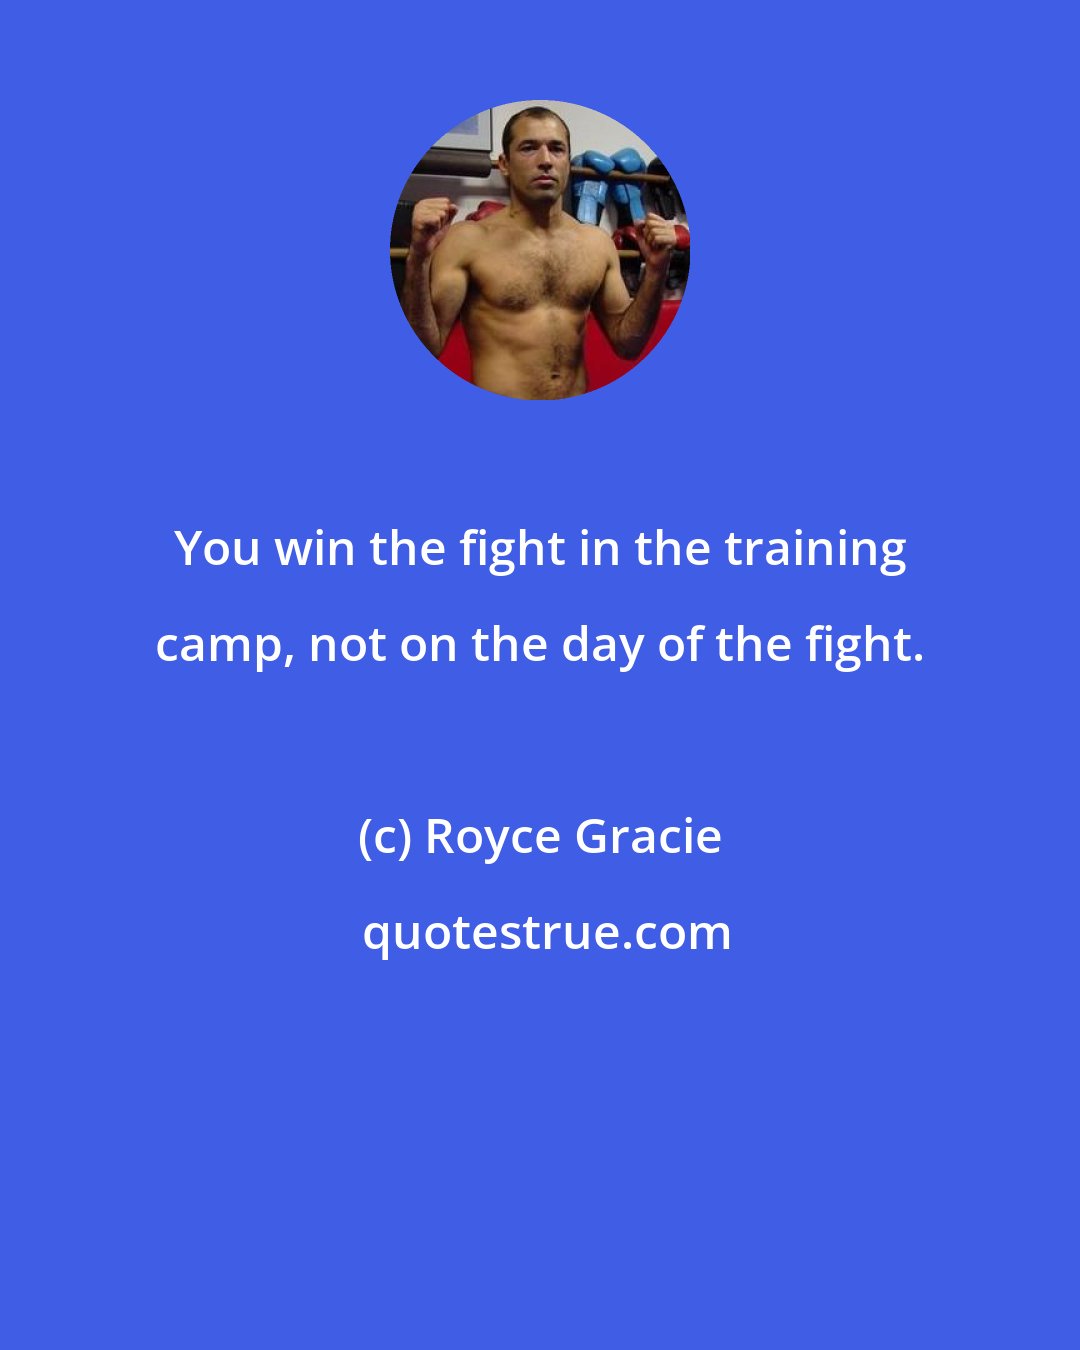 Royce Gracie: You win the fight in the training camp, not on the day of the fight.